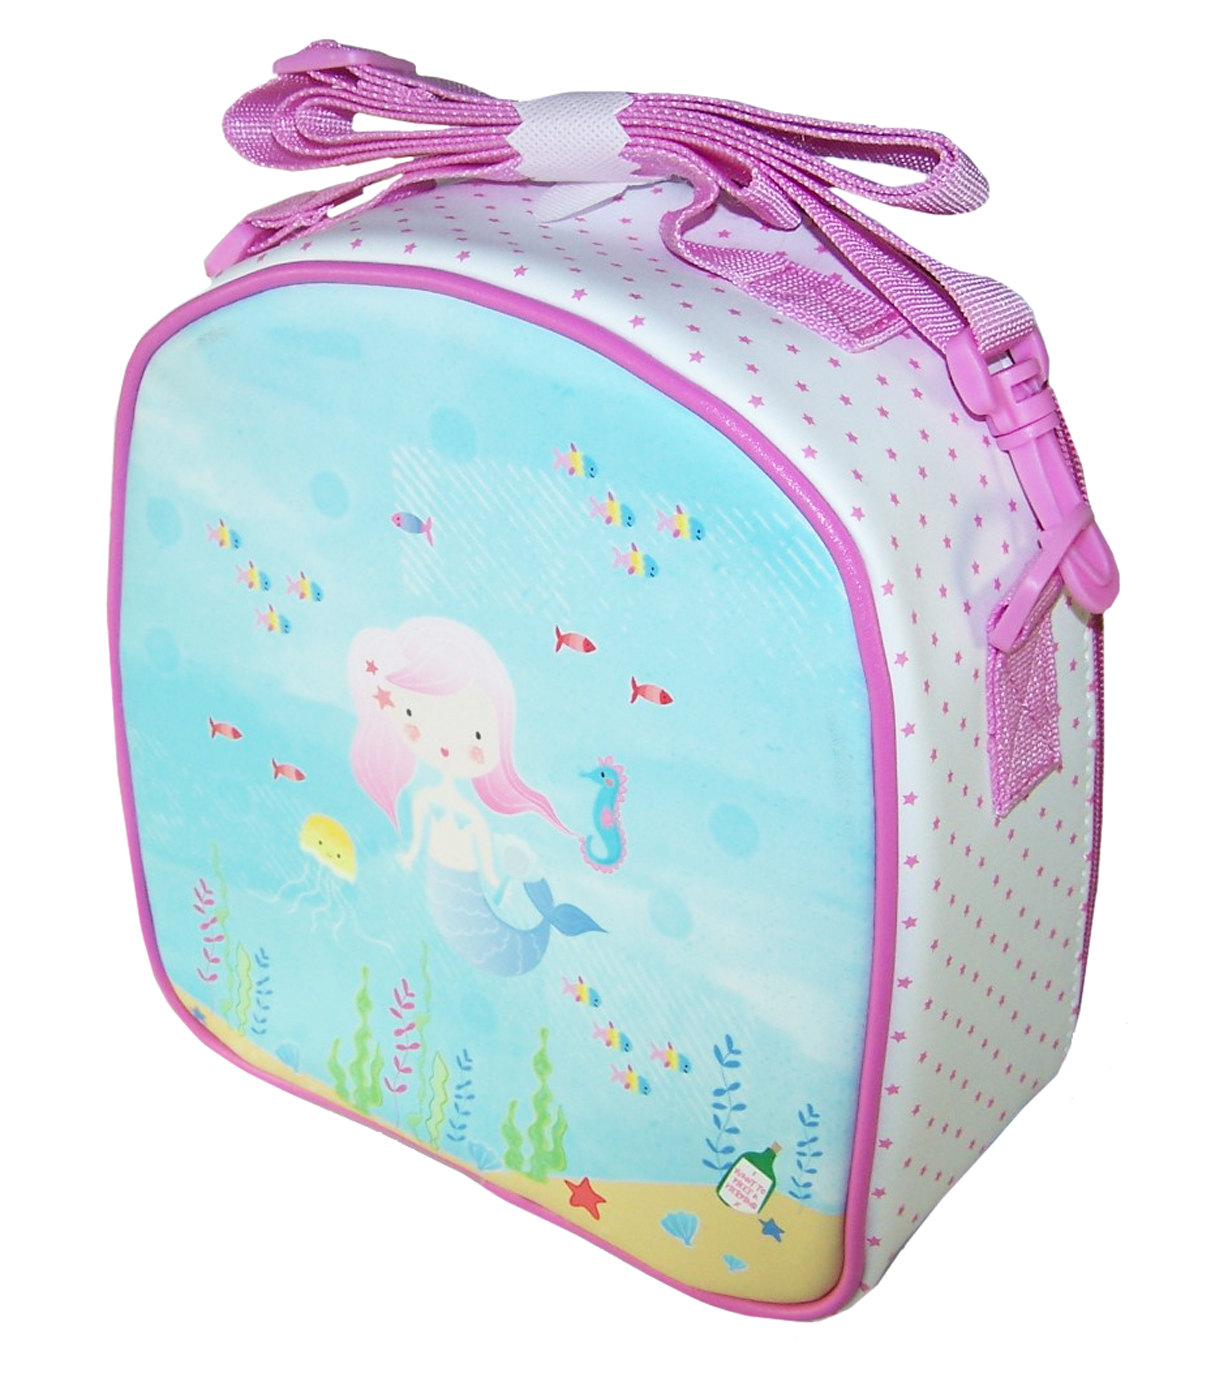 Girls pink and blue mermaid insulated lunch bag-5798